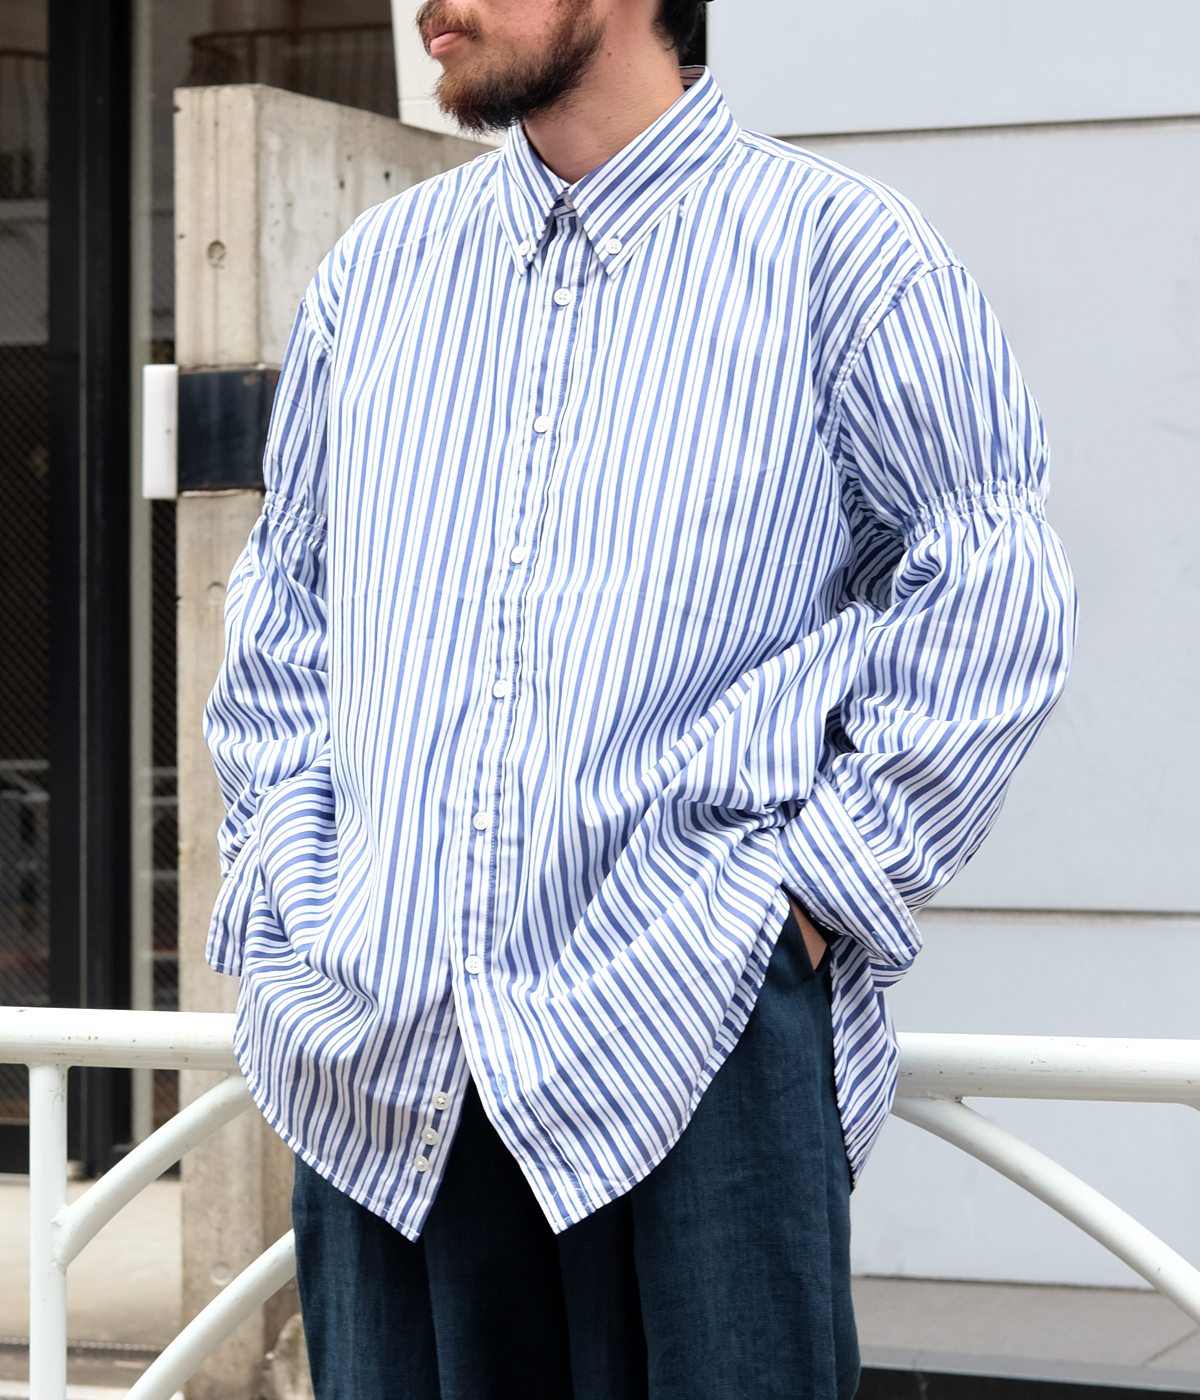 NEW ARRIVAL “WILLY CHAVARRIA -BIG WILLY DRESS SHIRT-“ | MAIDENS 